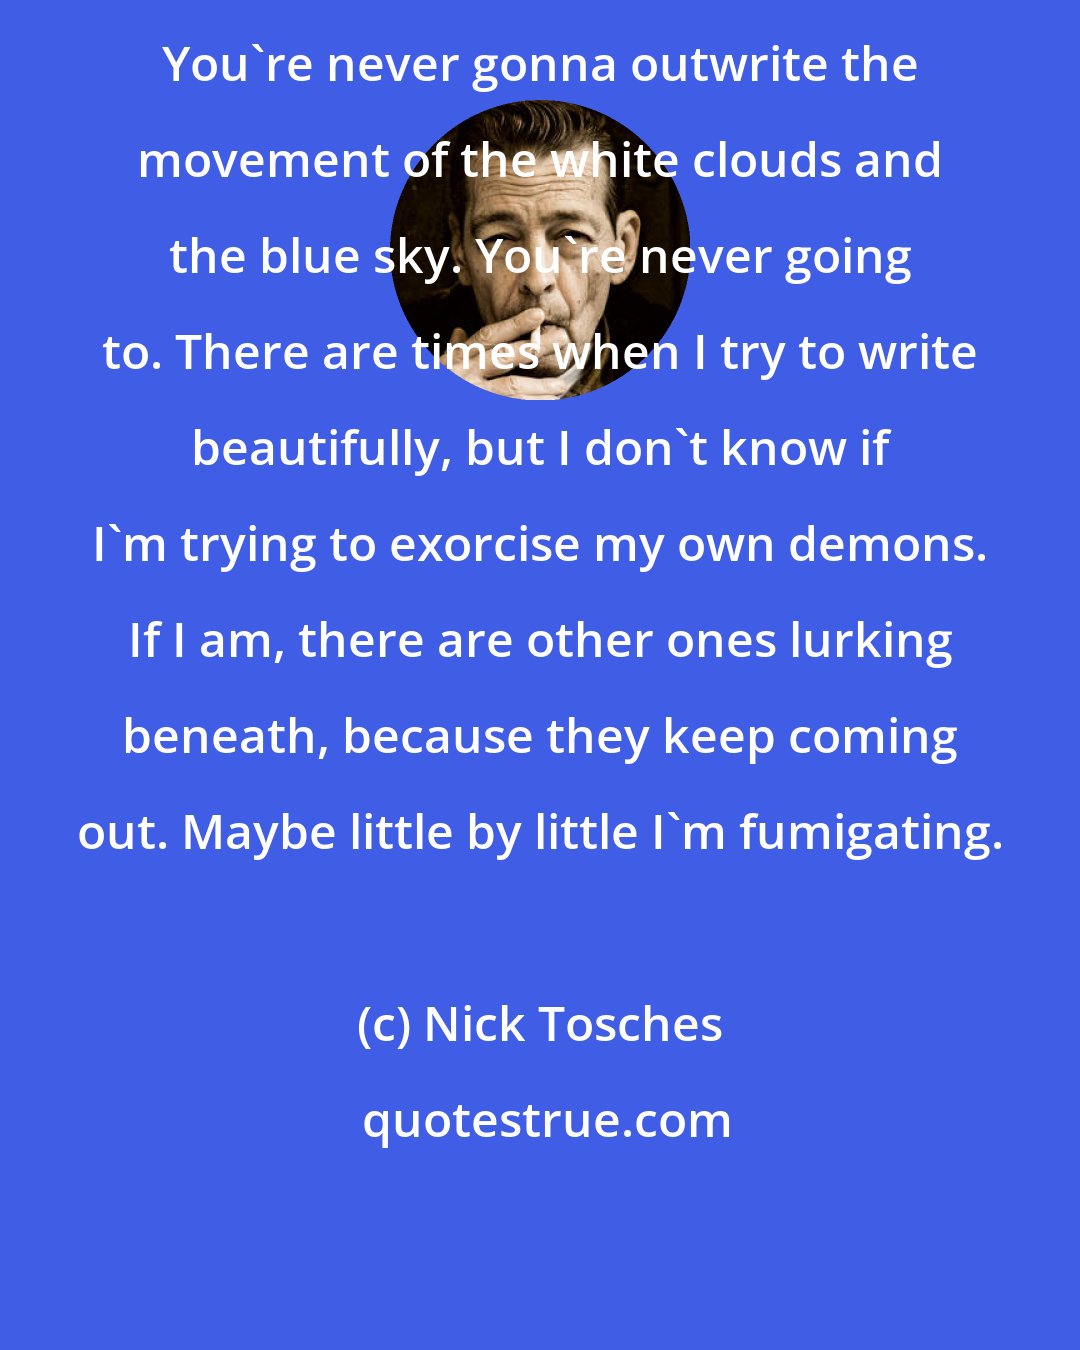 Nick Tosches: You're never gonna outwrite the movement of the white clouds and the blue sky. You're never going to. There are times when I try to write beautifully, but I don't know if I'm trying to exorcise my own demons. If I am, there are other ones lurking beneath, because they keep coming out. Maybe little by little I'm fumigating.